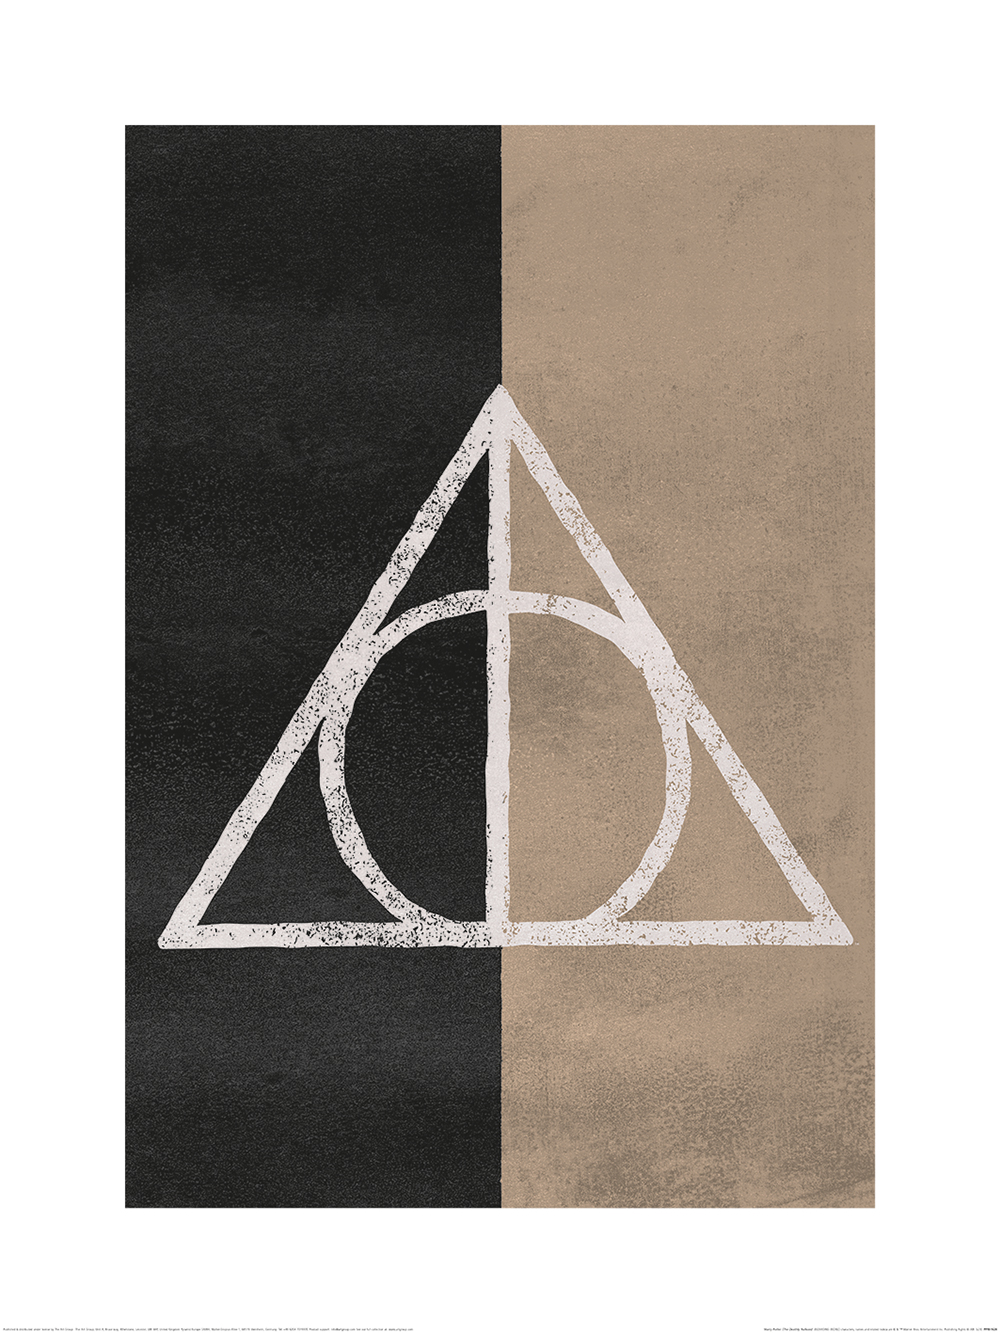 Harry Potter (The Deathly Hallows) Art Prints